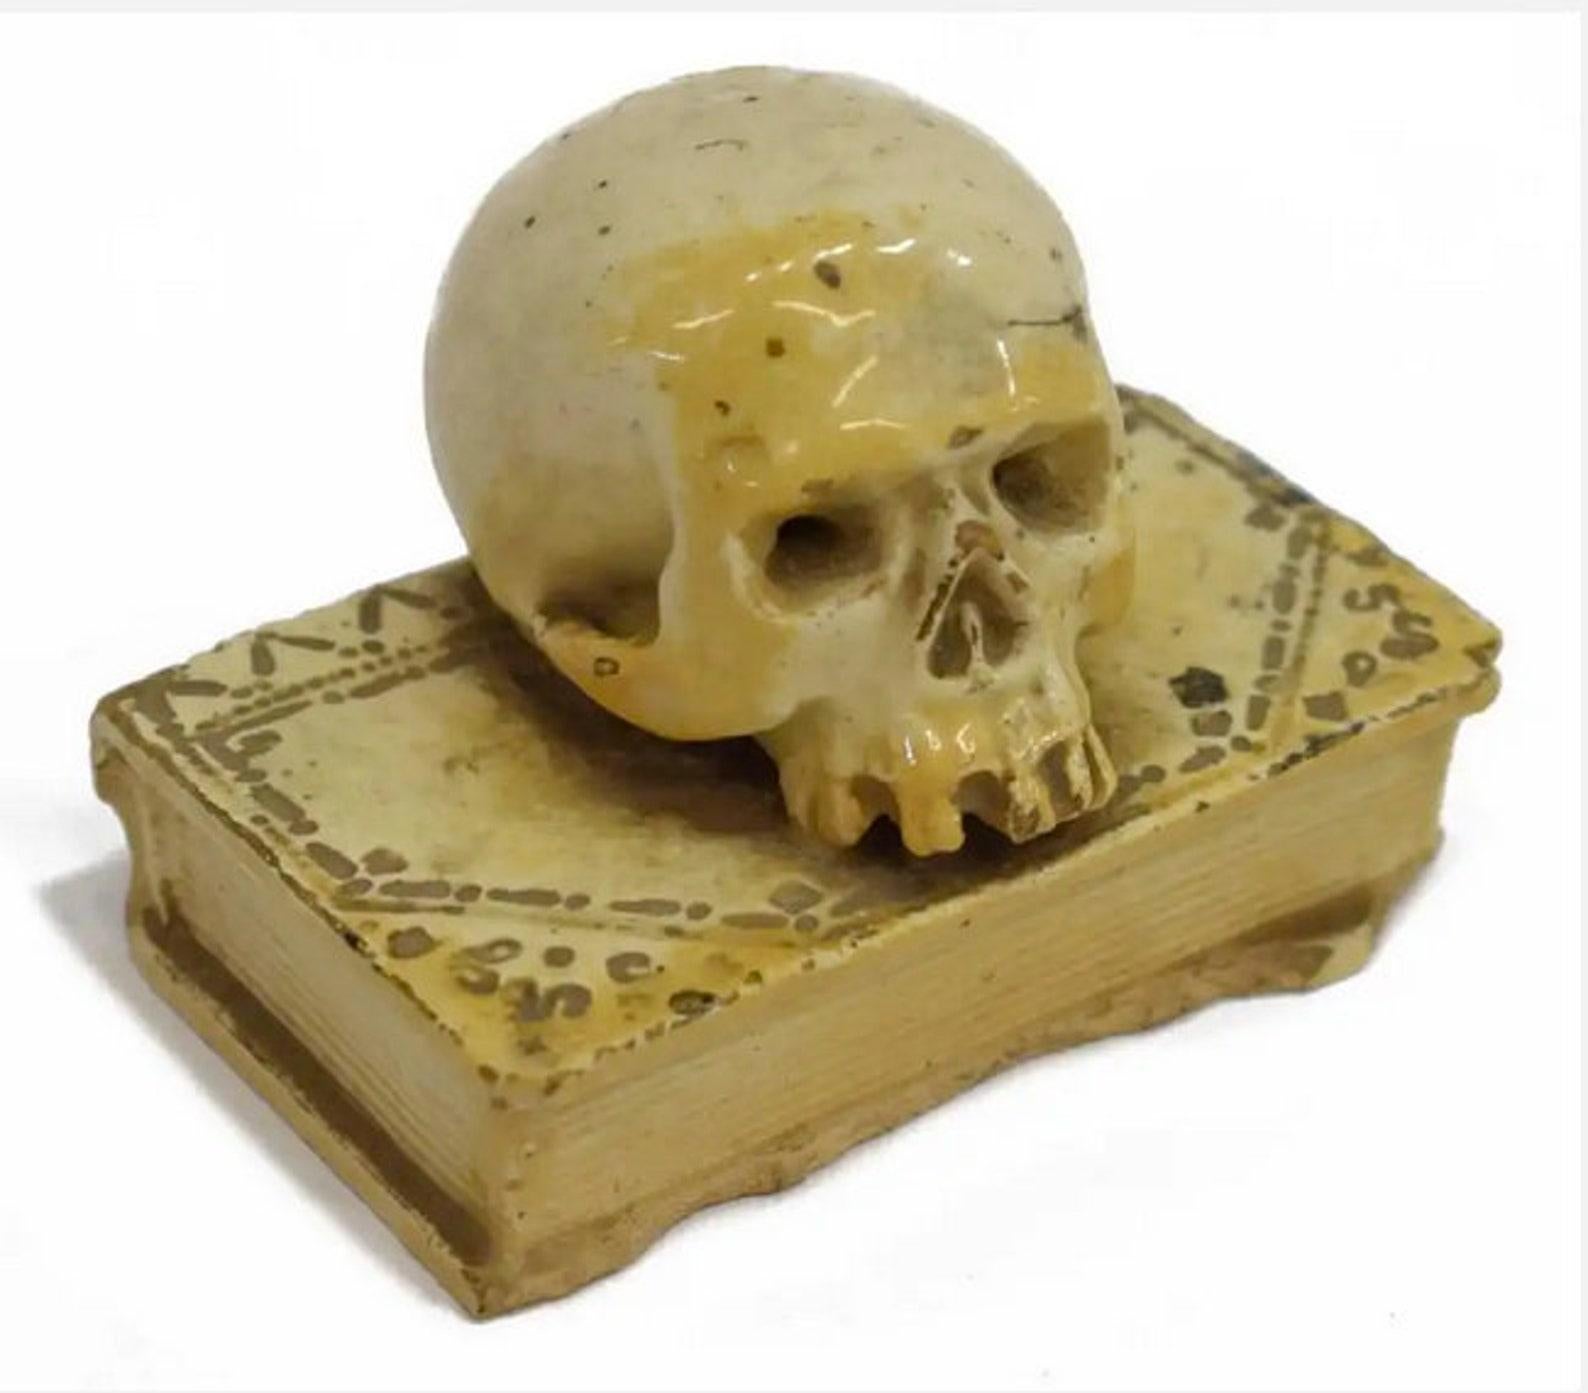 A scarce Italian ceramic Memento Mori, circa 1550, in the form of a human skull resting on a book.

Memento Mori is a Latin term that translates to “remember that you will die,” and has been illustrated in numerous works of art. While the